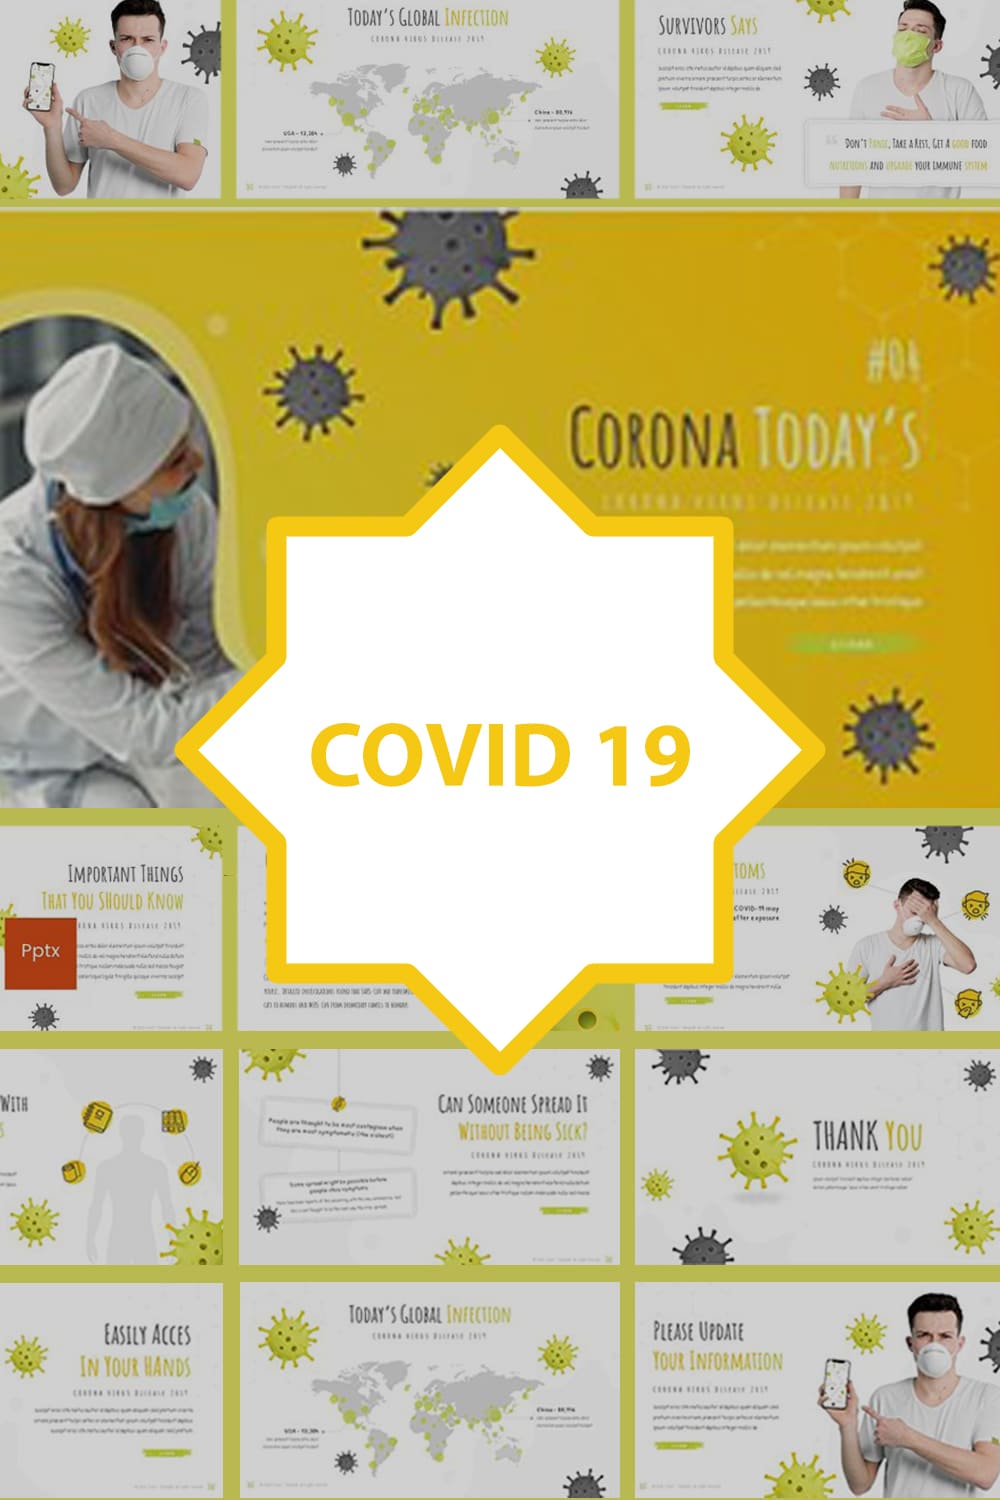 Covid 19 - Powerpoint Template Pinterest.